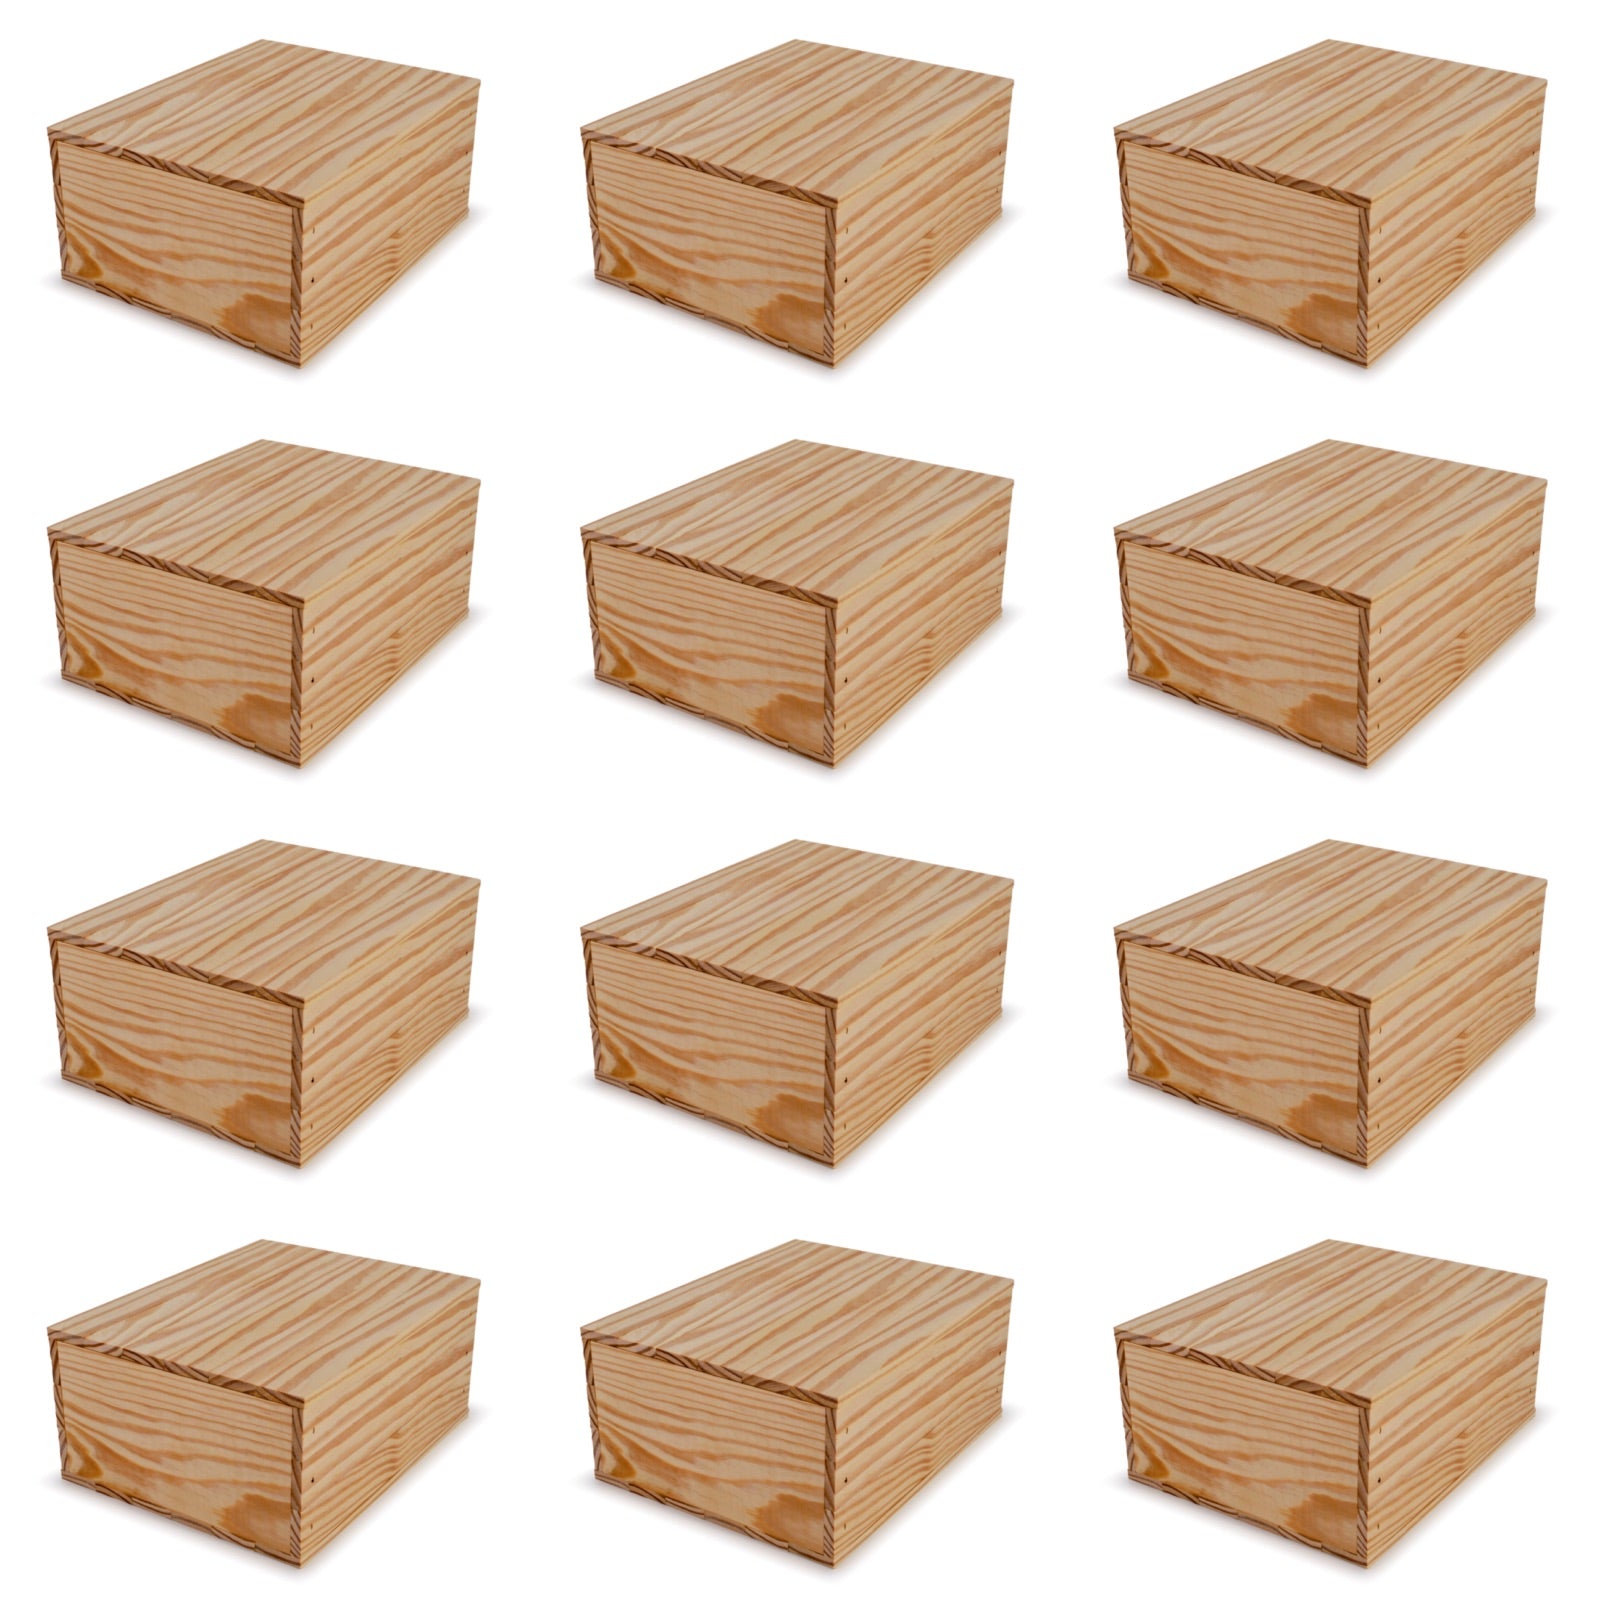 12 Small wooden crates with lid 12x9.75x5.25